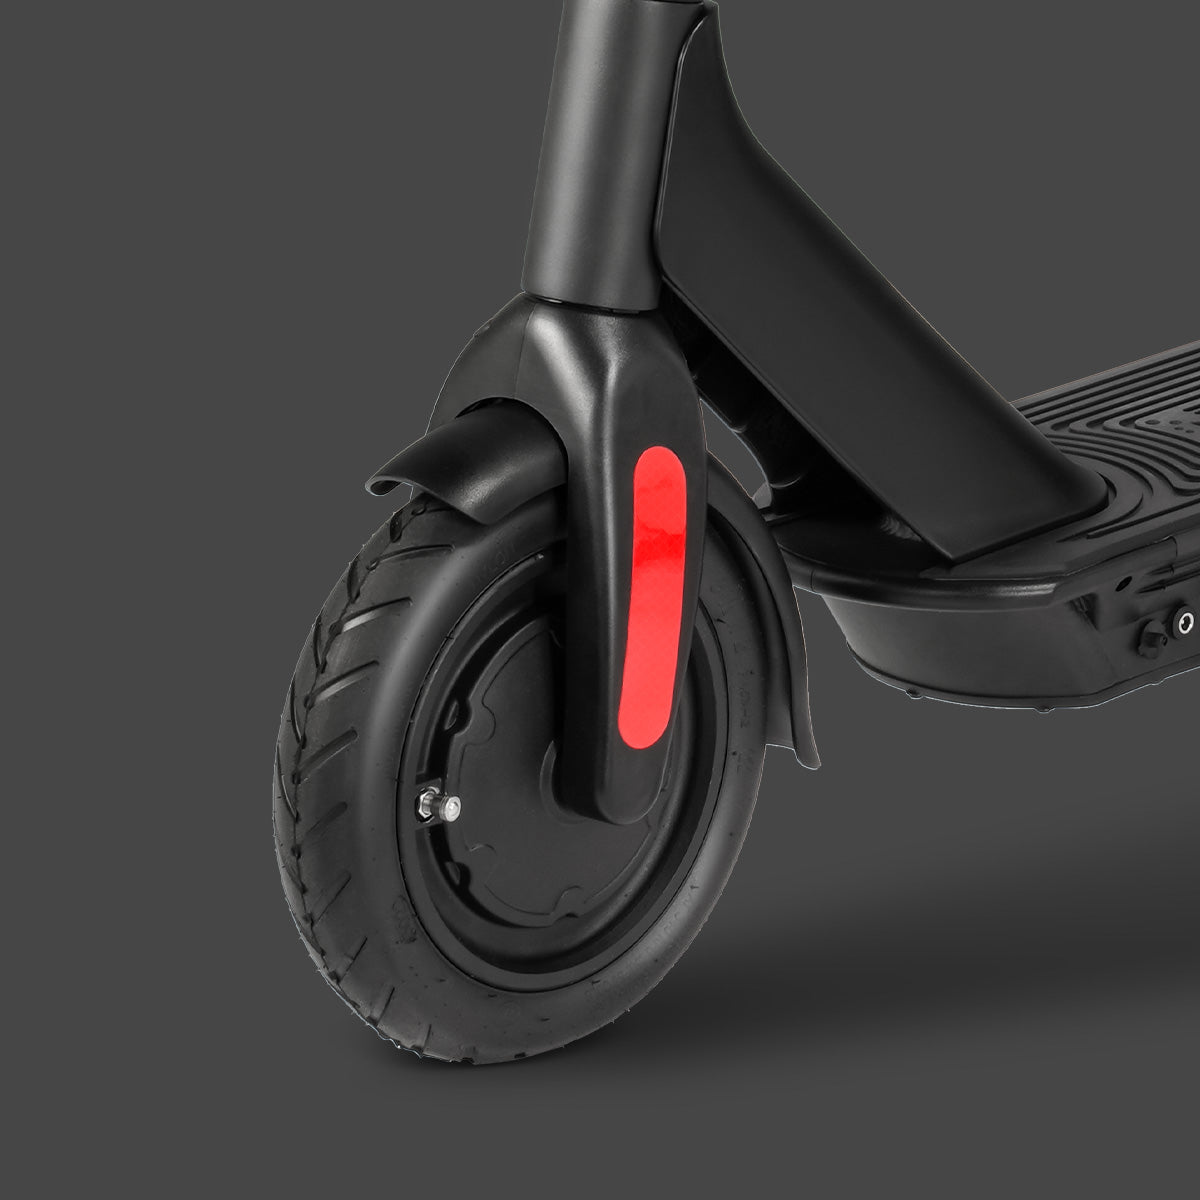 M10 Pro Commuting Electric Scooter